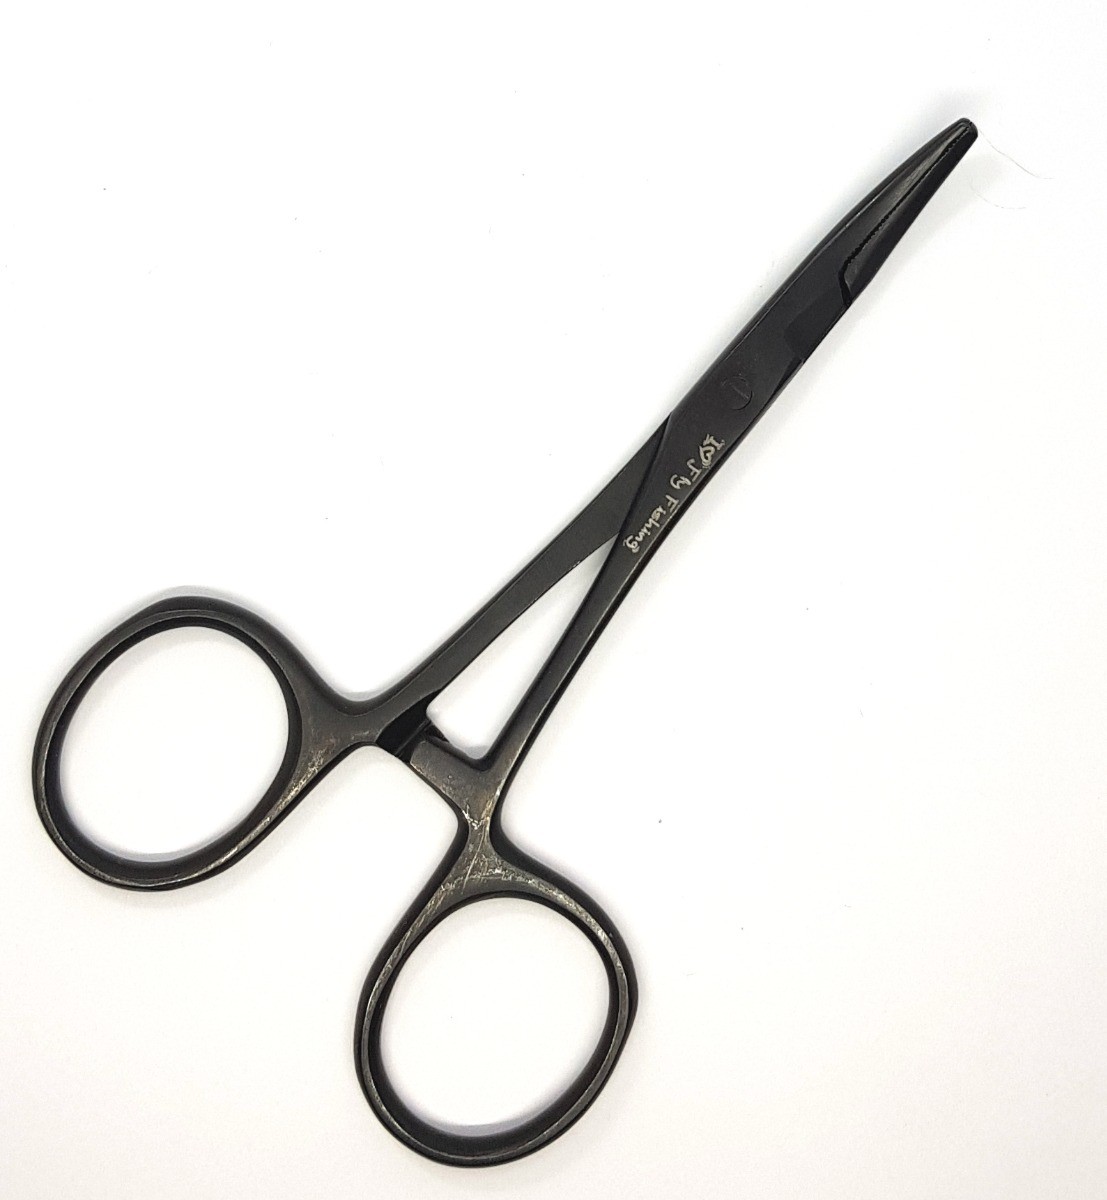 Black Pro Forceps 5 Curved Tip with Scissor Function - I Love Fly Fishing